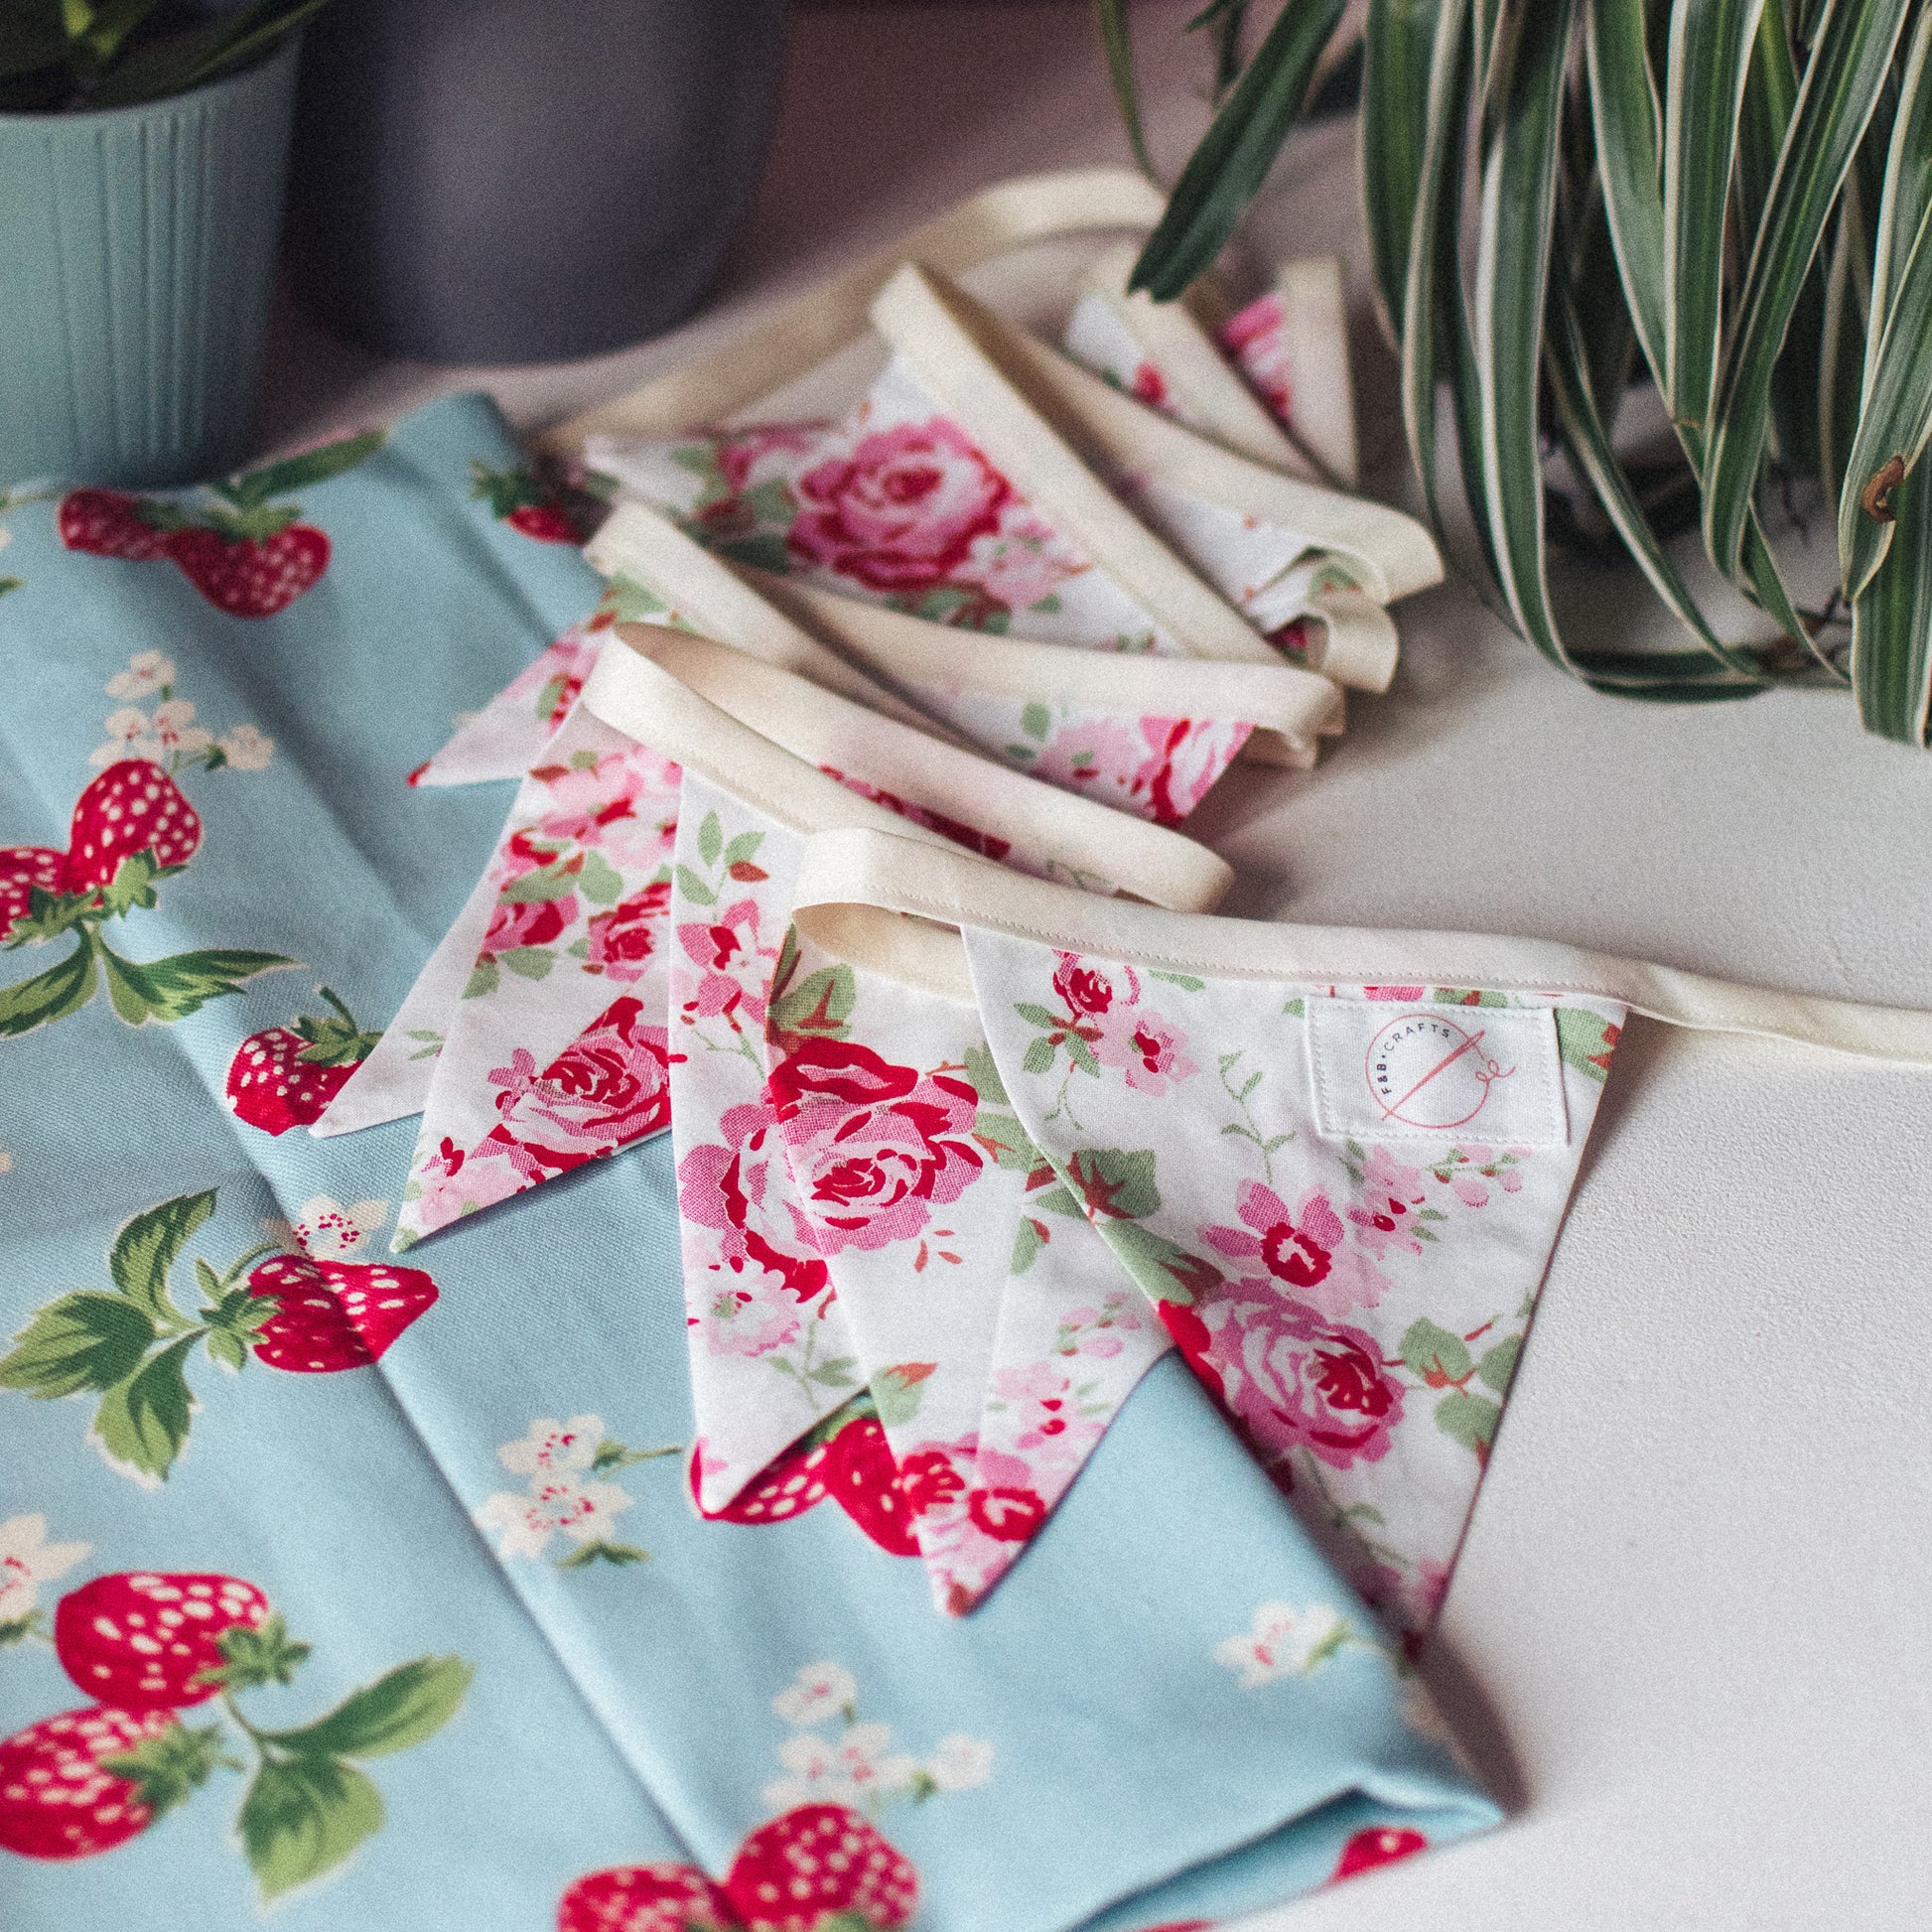 Rosali Vintage Style Cath Kidston Bunting draped against a charming strawberry print Cath Kidston fabric backdrop.